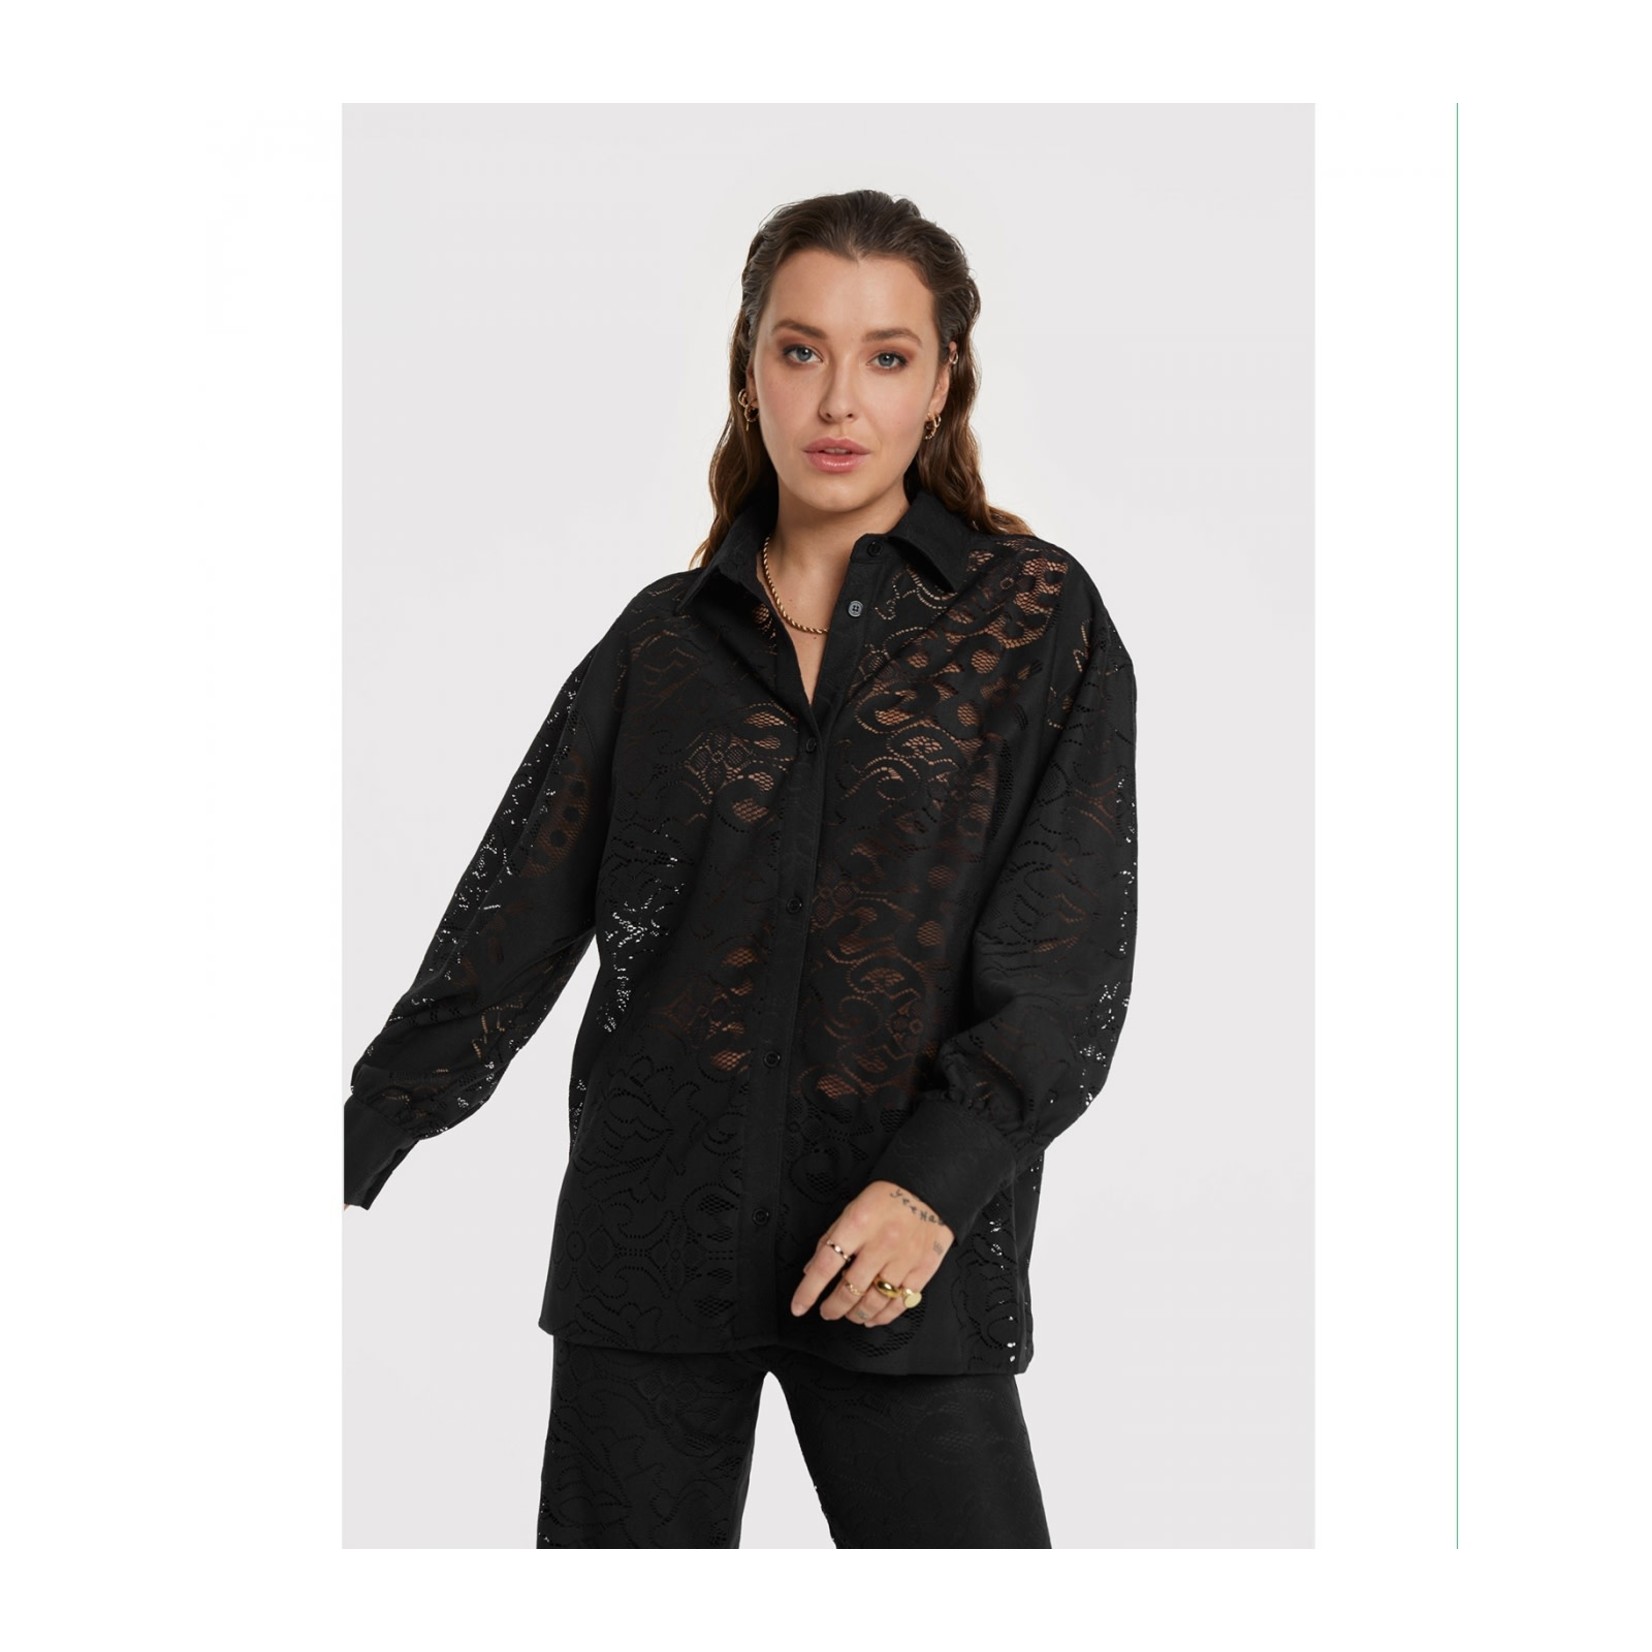 Alix The Label Alix The Label knitted heavy lace blouse